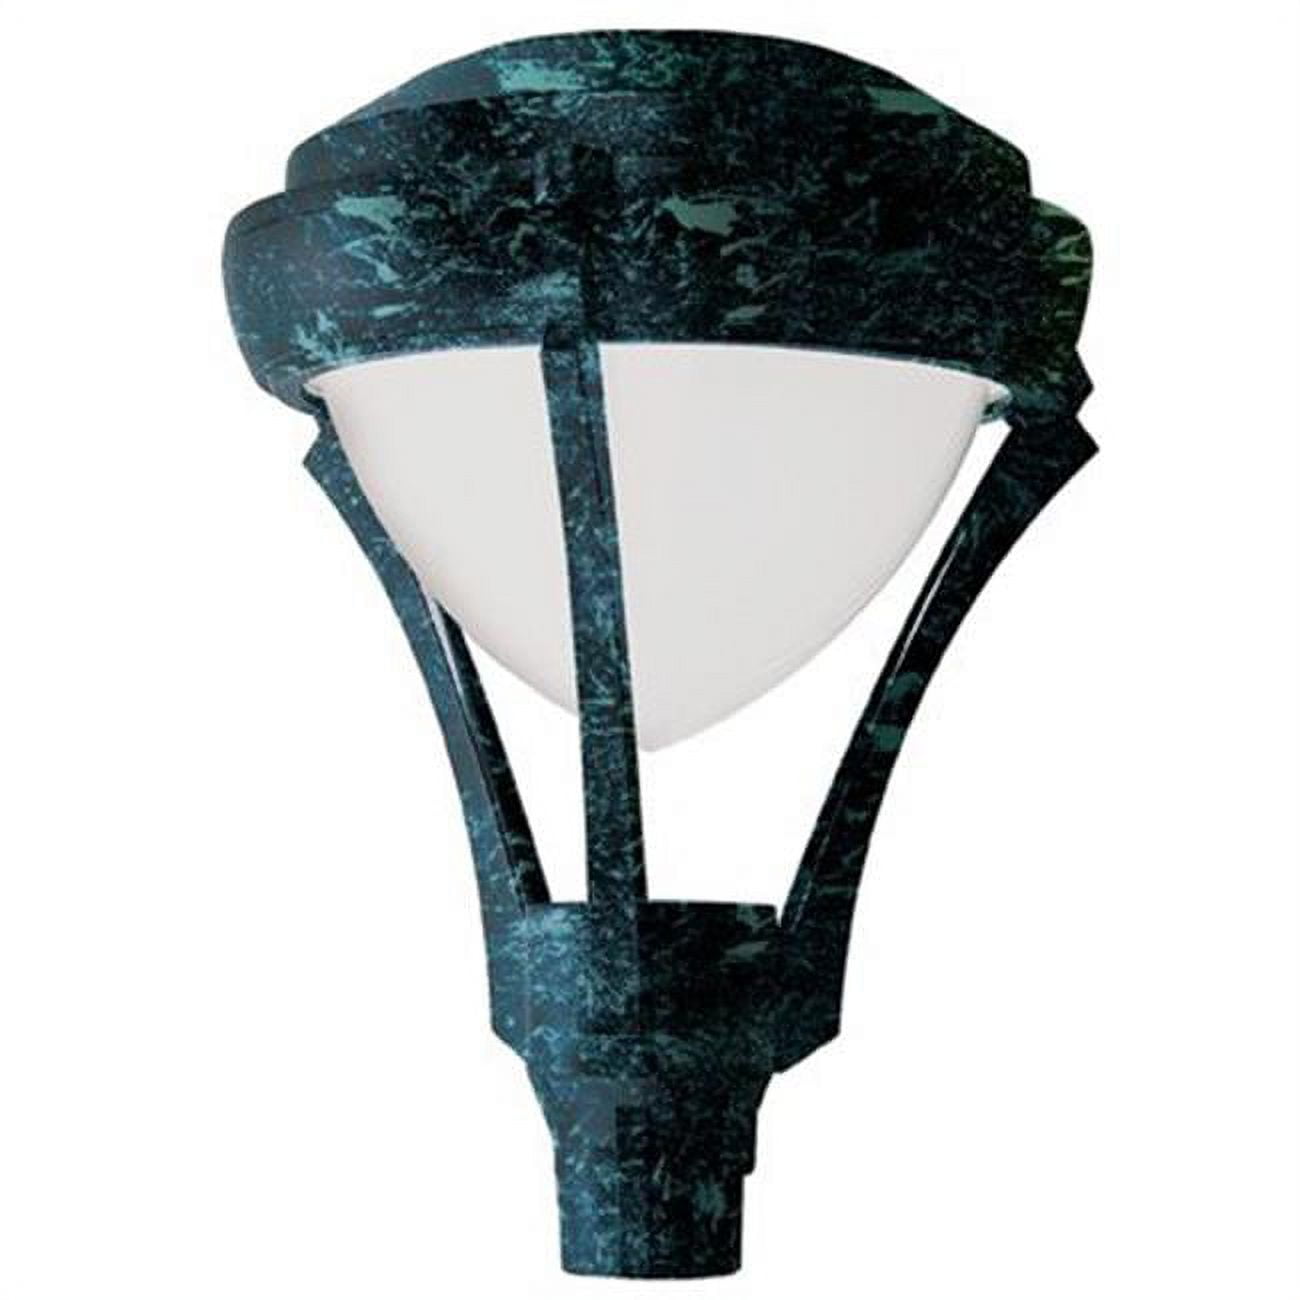 Picture of Dabmar Lighting GM591-VG-MT 50W Powder Coated Cast Aluminum Post Top Light Fixture with High Pressure Sodium Lamp, Verde Green - 27.95 x 21.65 x 21.65 in.